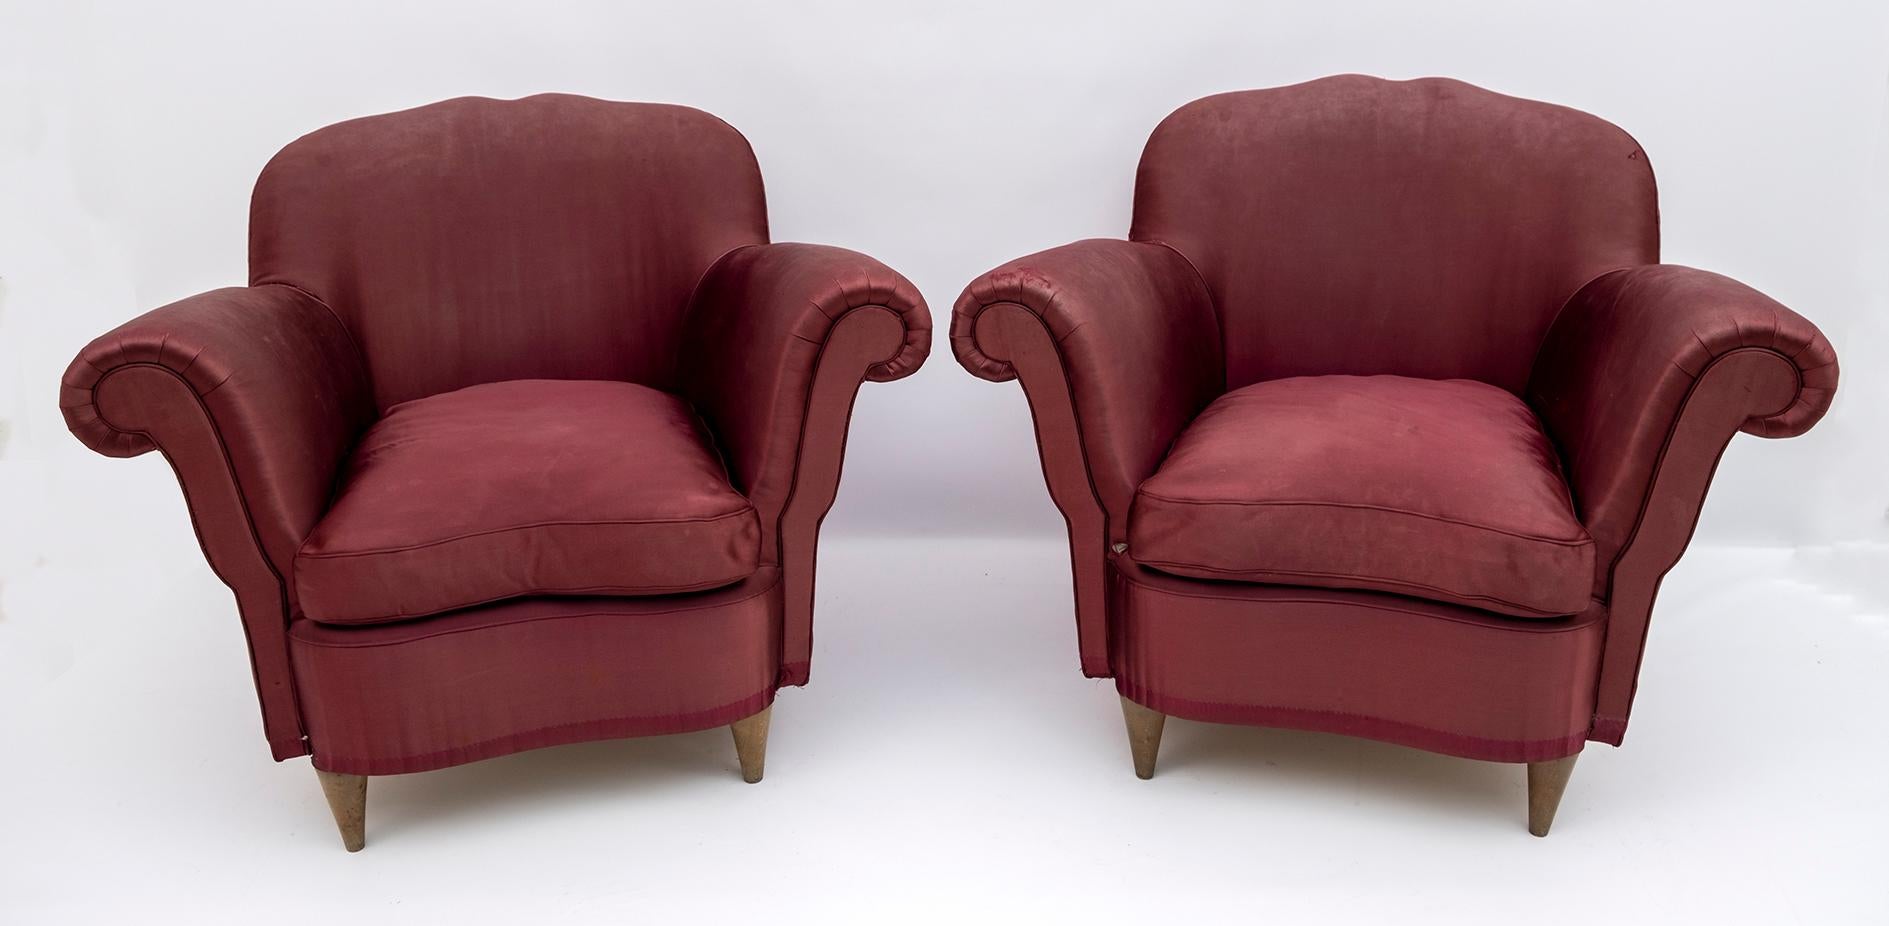 Beautiful pair of armchairs designed by Federico Munari in the early 1950s, this model is very rare and is one of the first models designed by Munari. The satin covering is original from the time but it is recommended to replace it as you can see